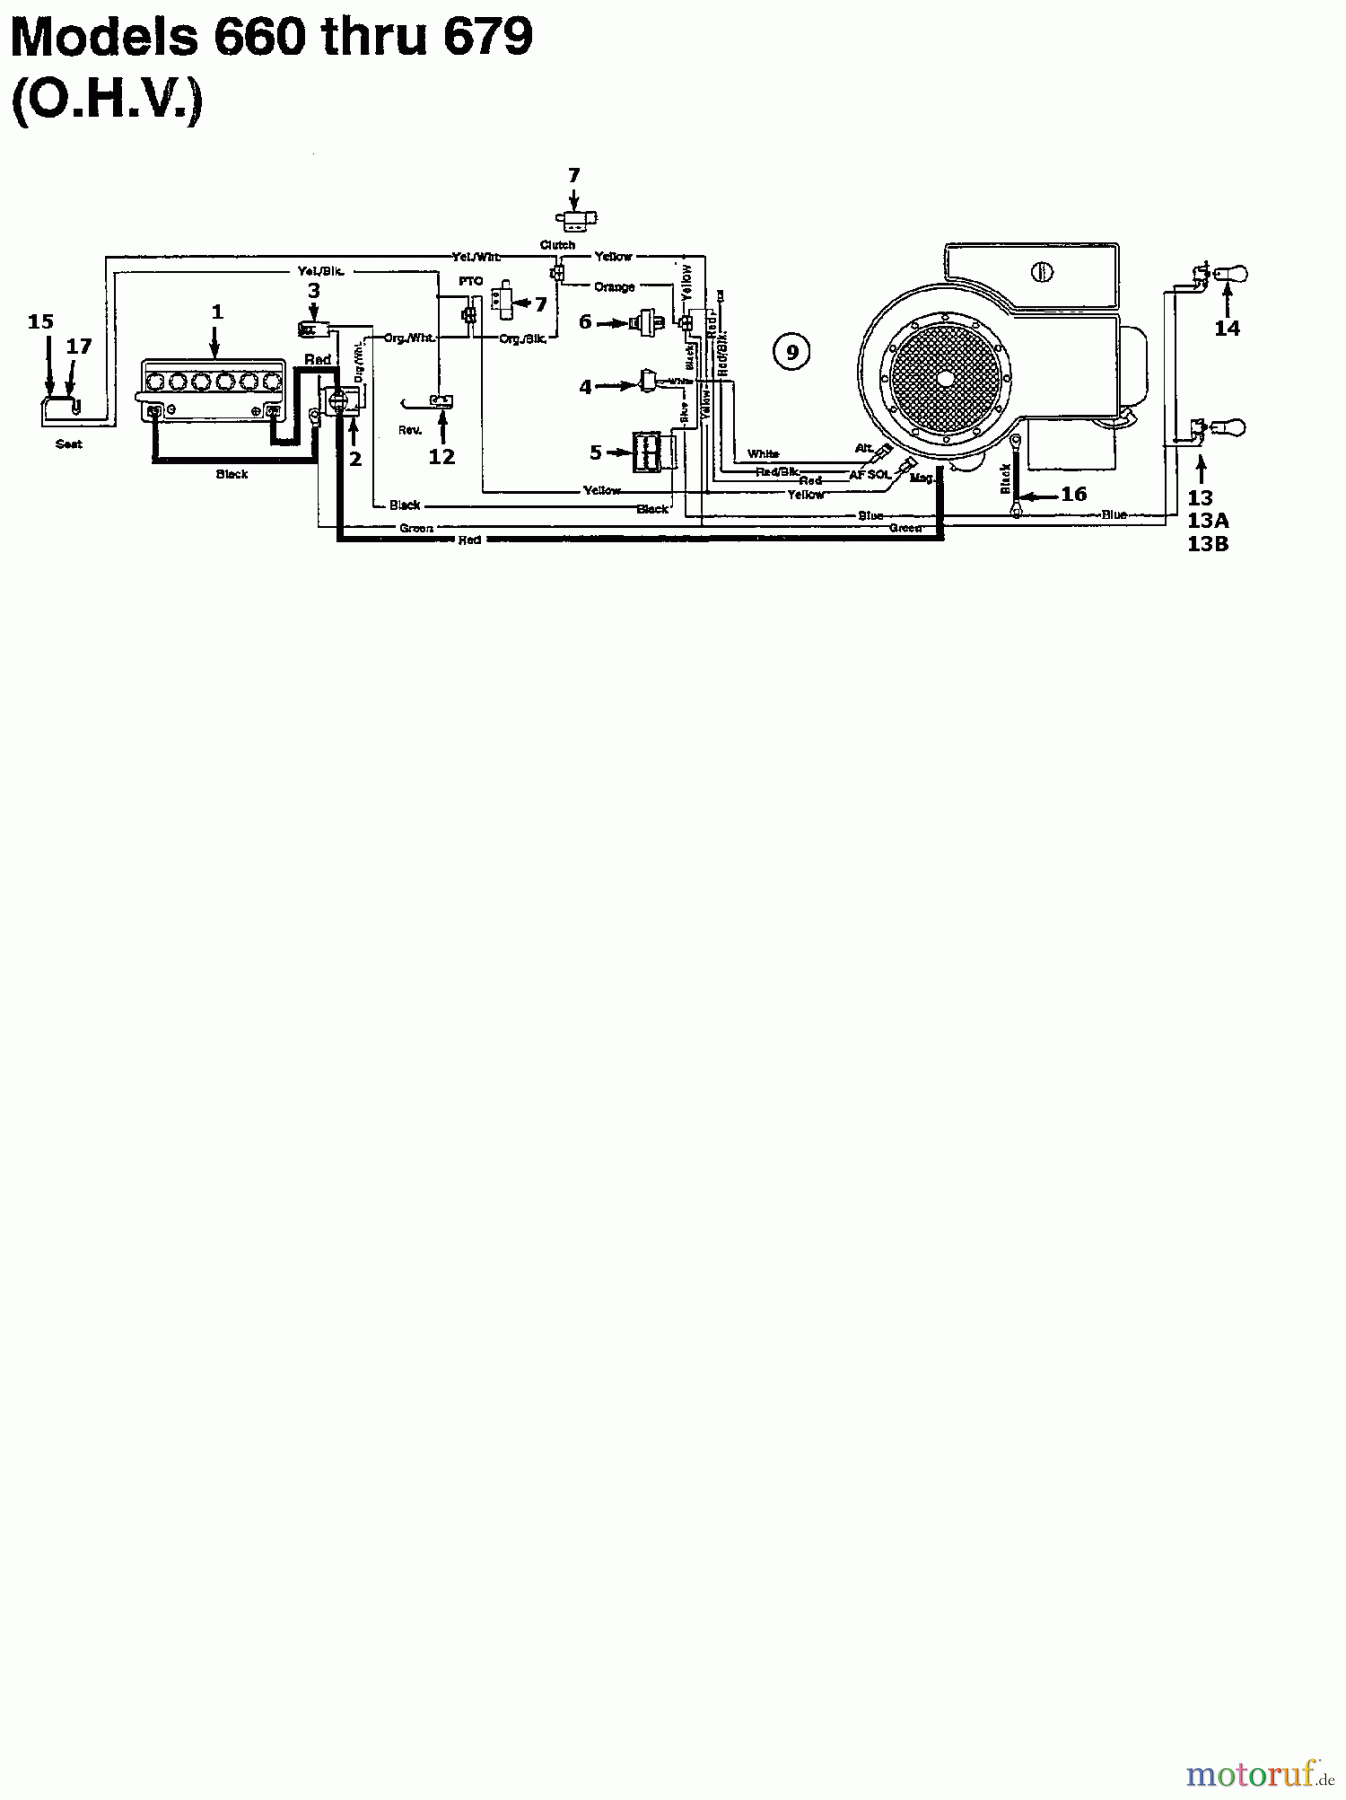  Brill Lawn tractors 76 RTH 134K677C629  (1994) Wiring diagram for O.H.V.